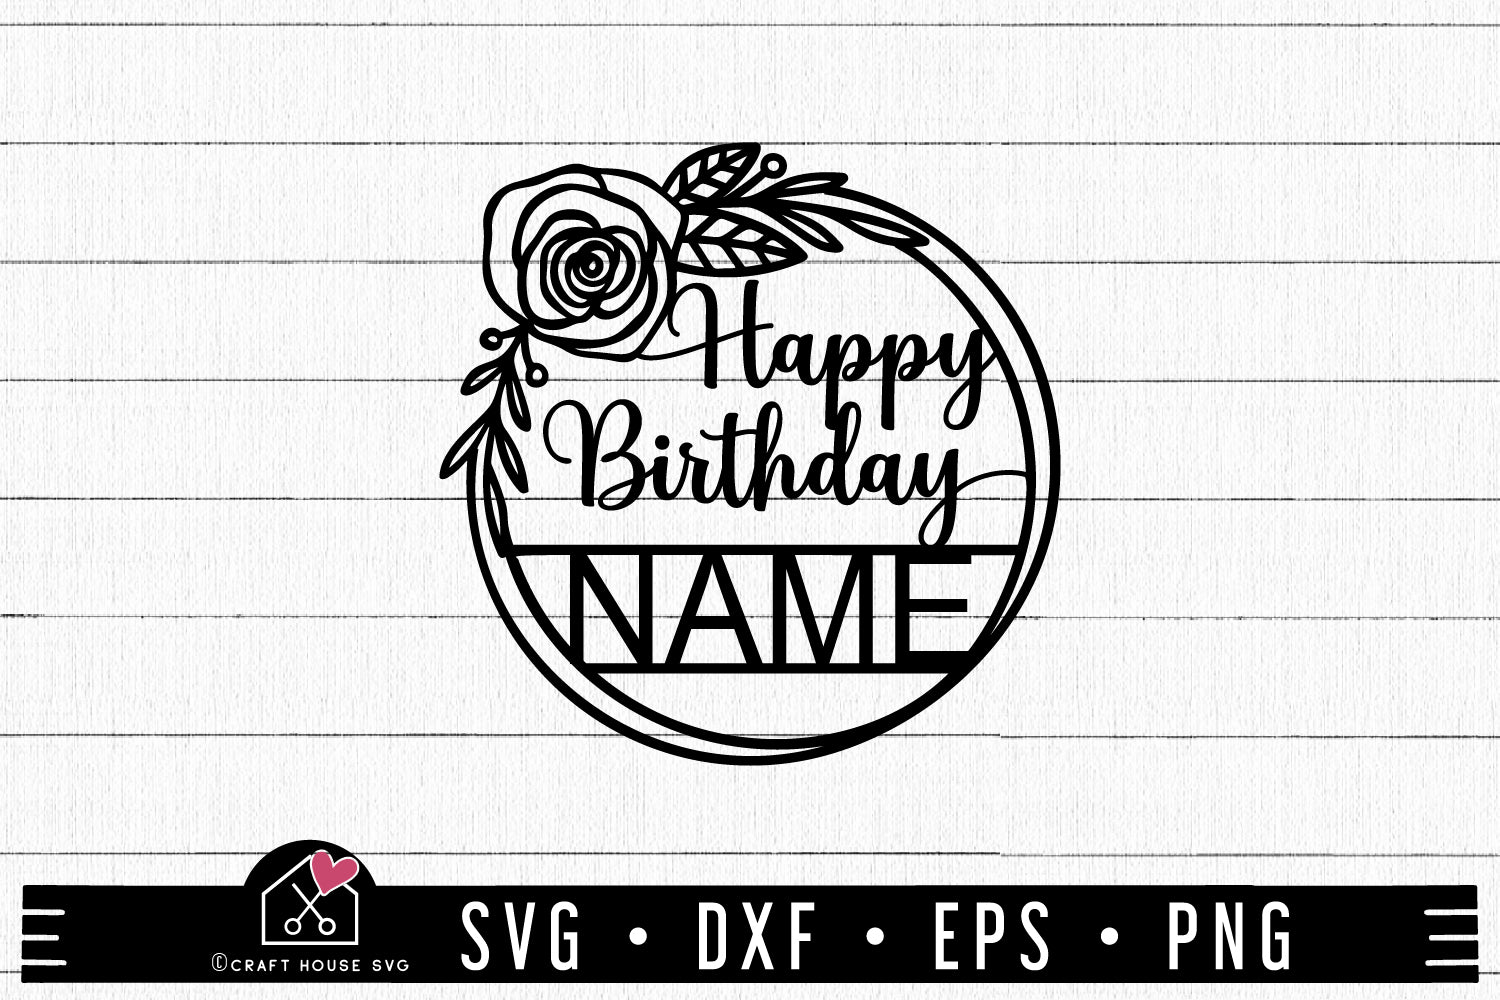 Happy Birthday Cake Topper Svg, Happy Birthday Svg, Cake Topper Svg, Cut  Files for Cricut, Silhouette, Glowforge, Dxf, Png -  Canada